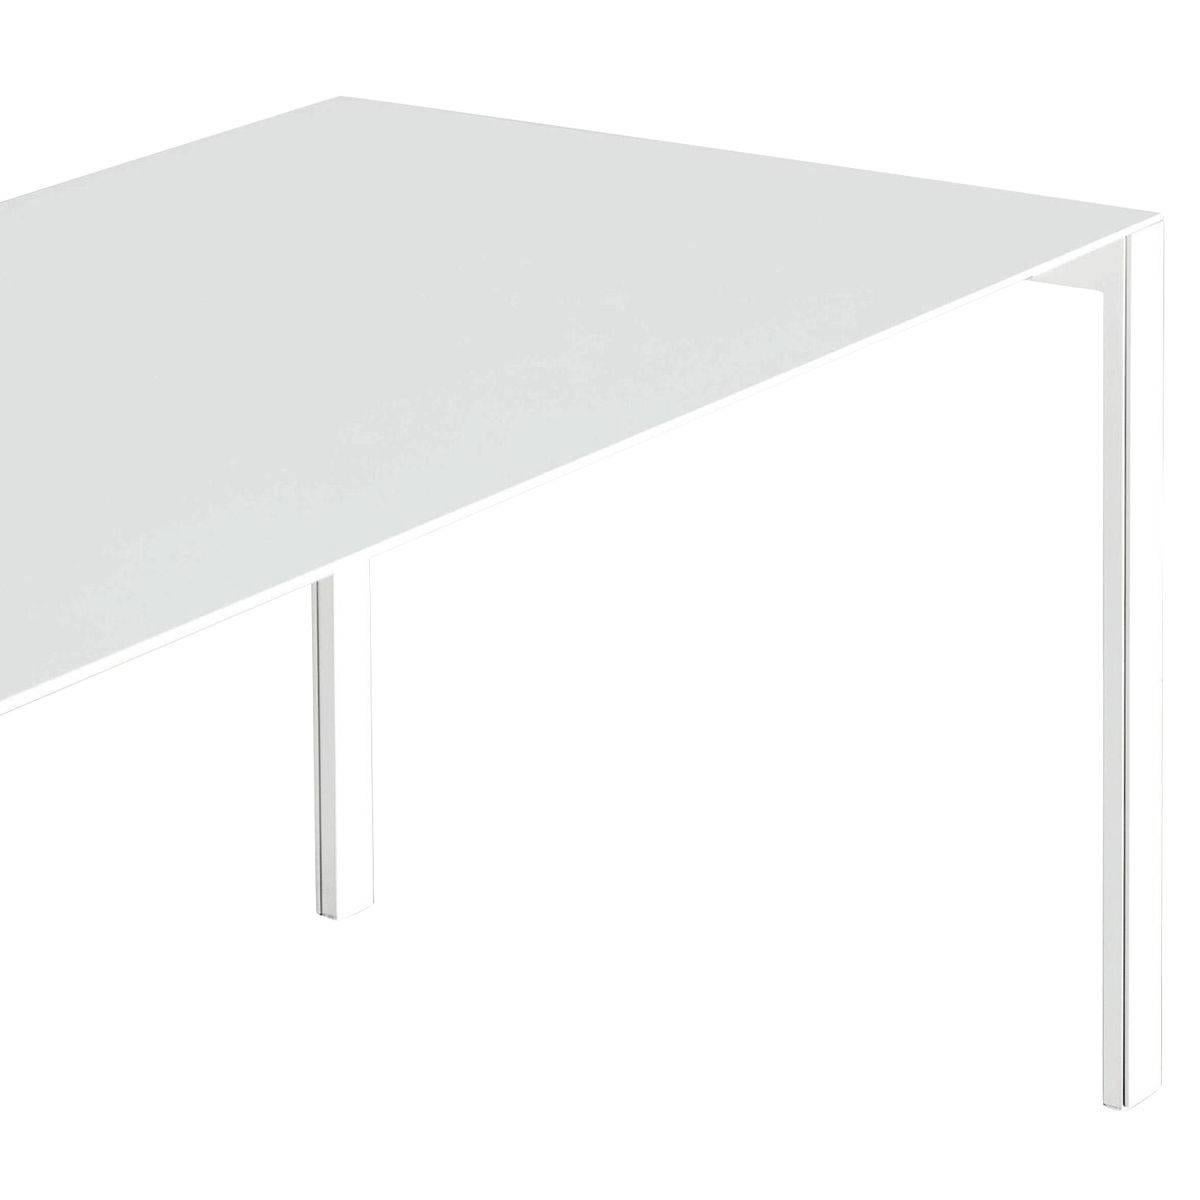 Thin-K aluminium is an indoor or outdoor table with a powder coated aluminium top and aluminium supports with steel legs. 

This Thin-K is 295 x 100 x 75cm (118.14